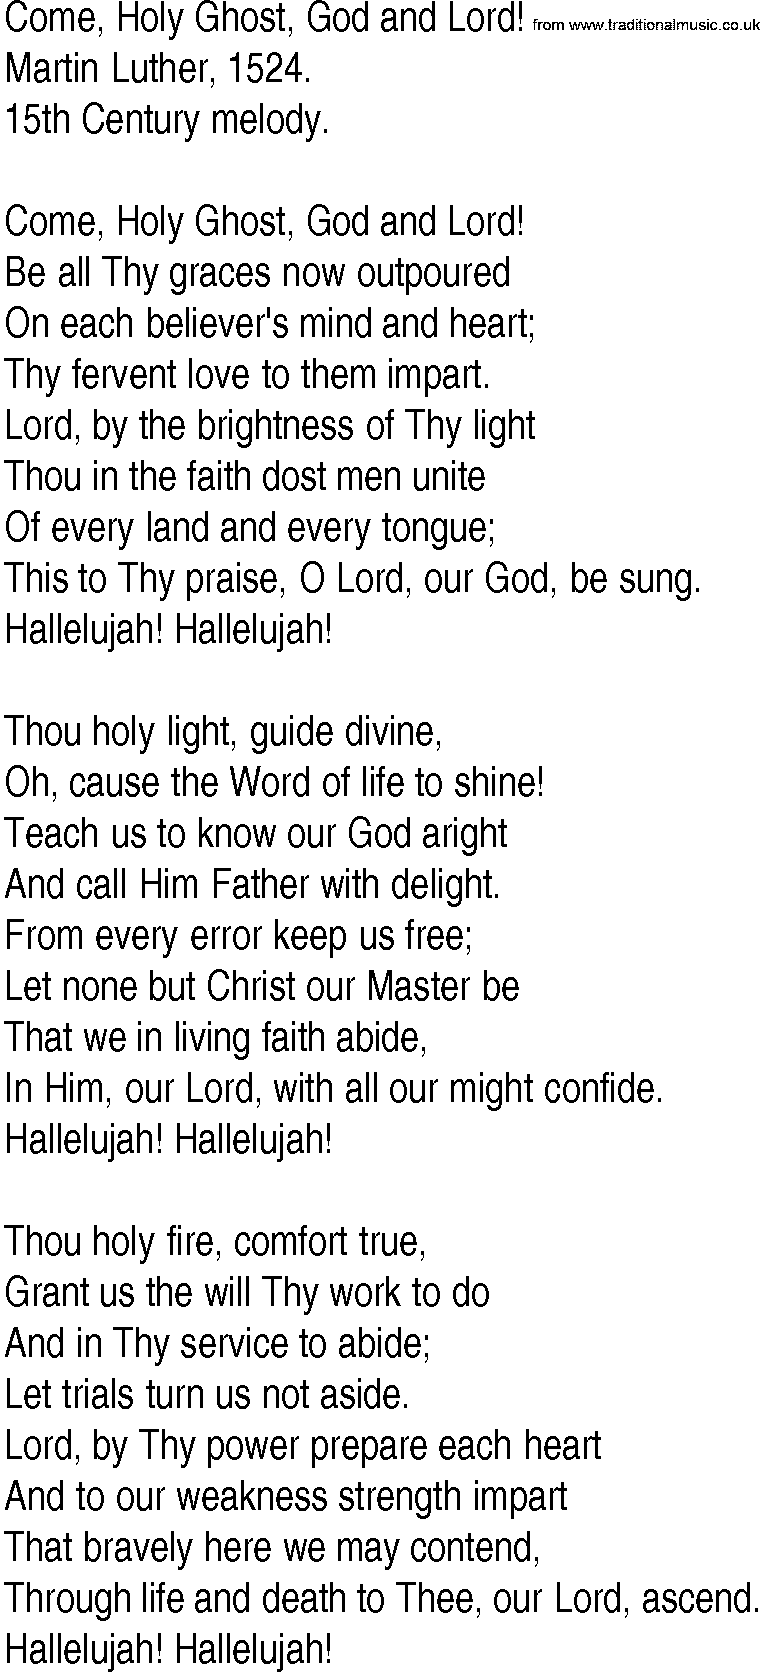 Hymn and Gospel Song: Come, Holy Ghost, God and Lord! by Martin Luther lyrics